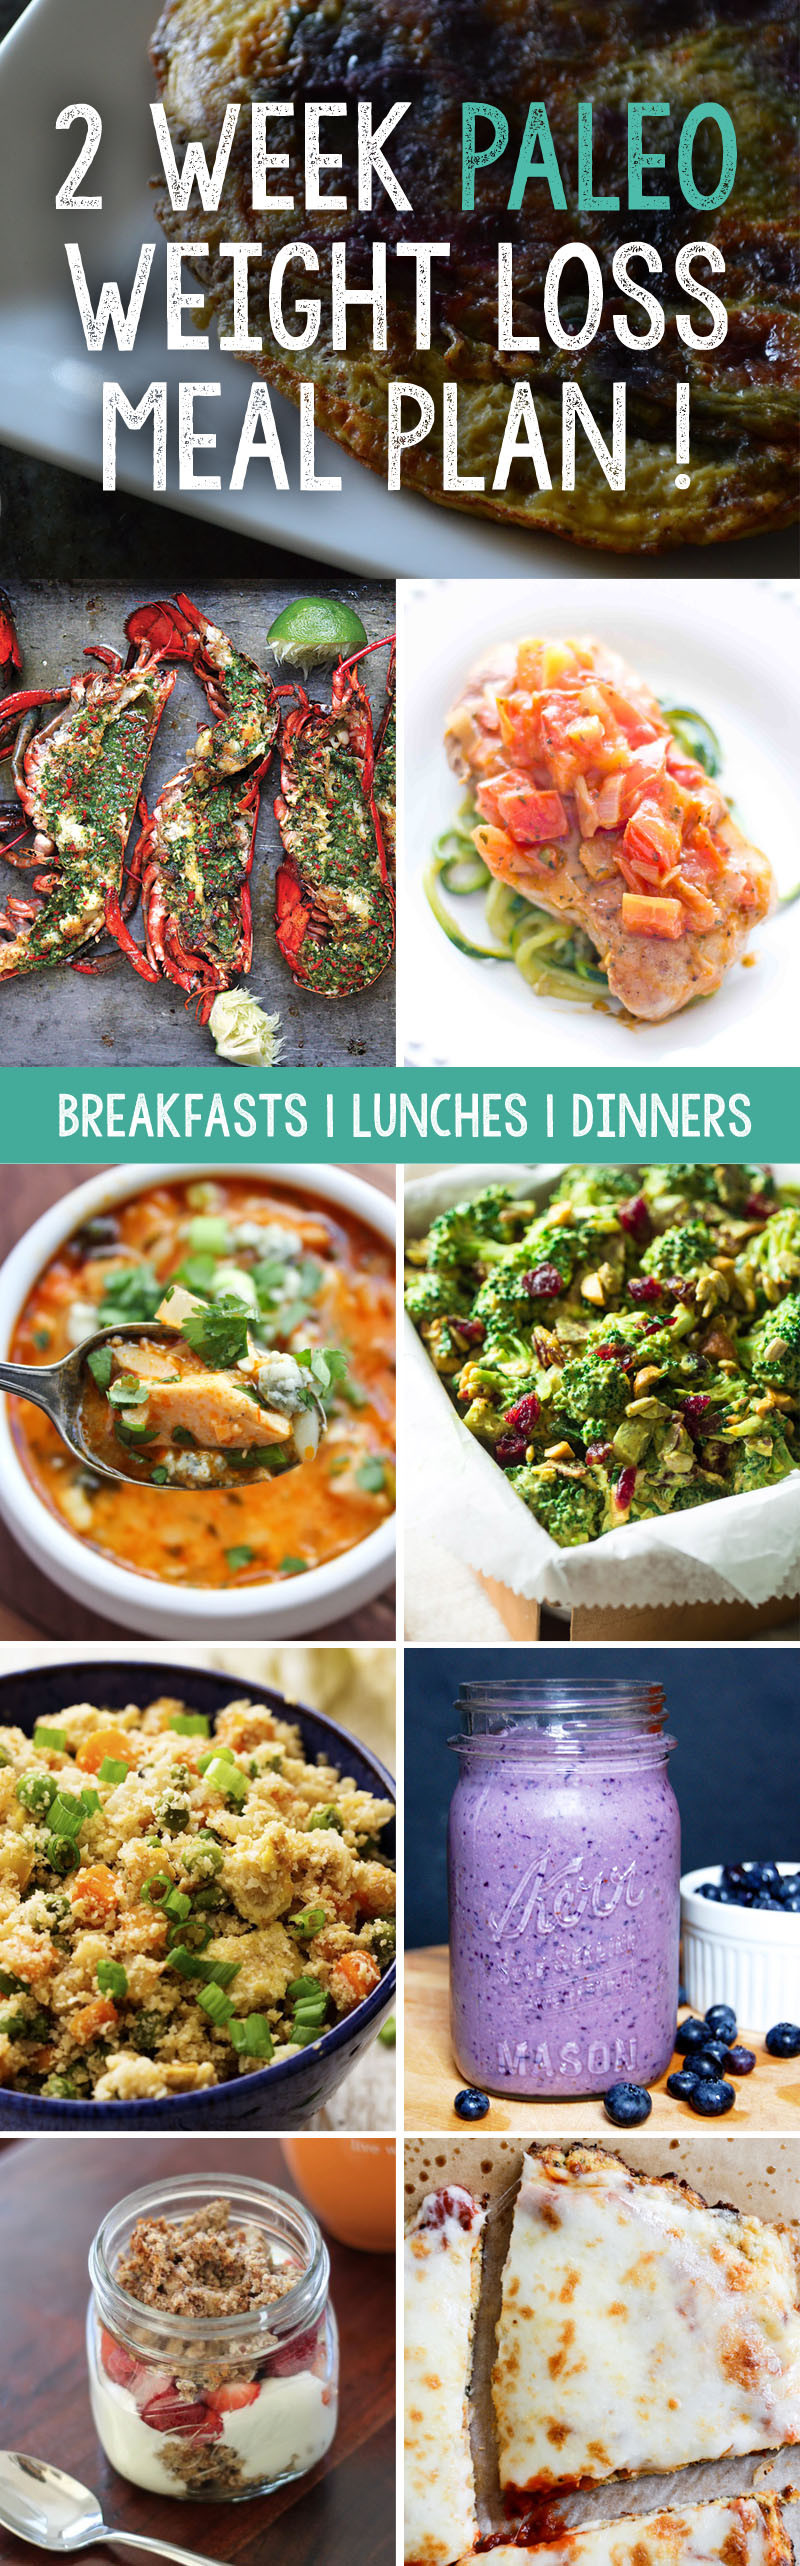 Healthy Paleo Dinners
 2 Week Paleo Meal Plan That Will Help You Lose Weight Fast